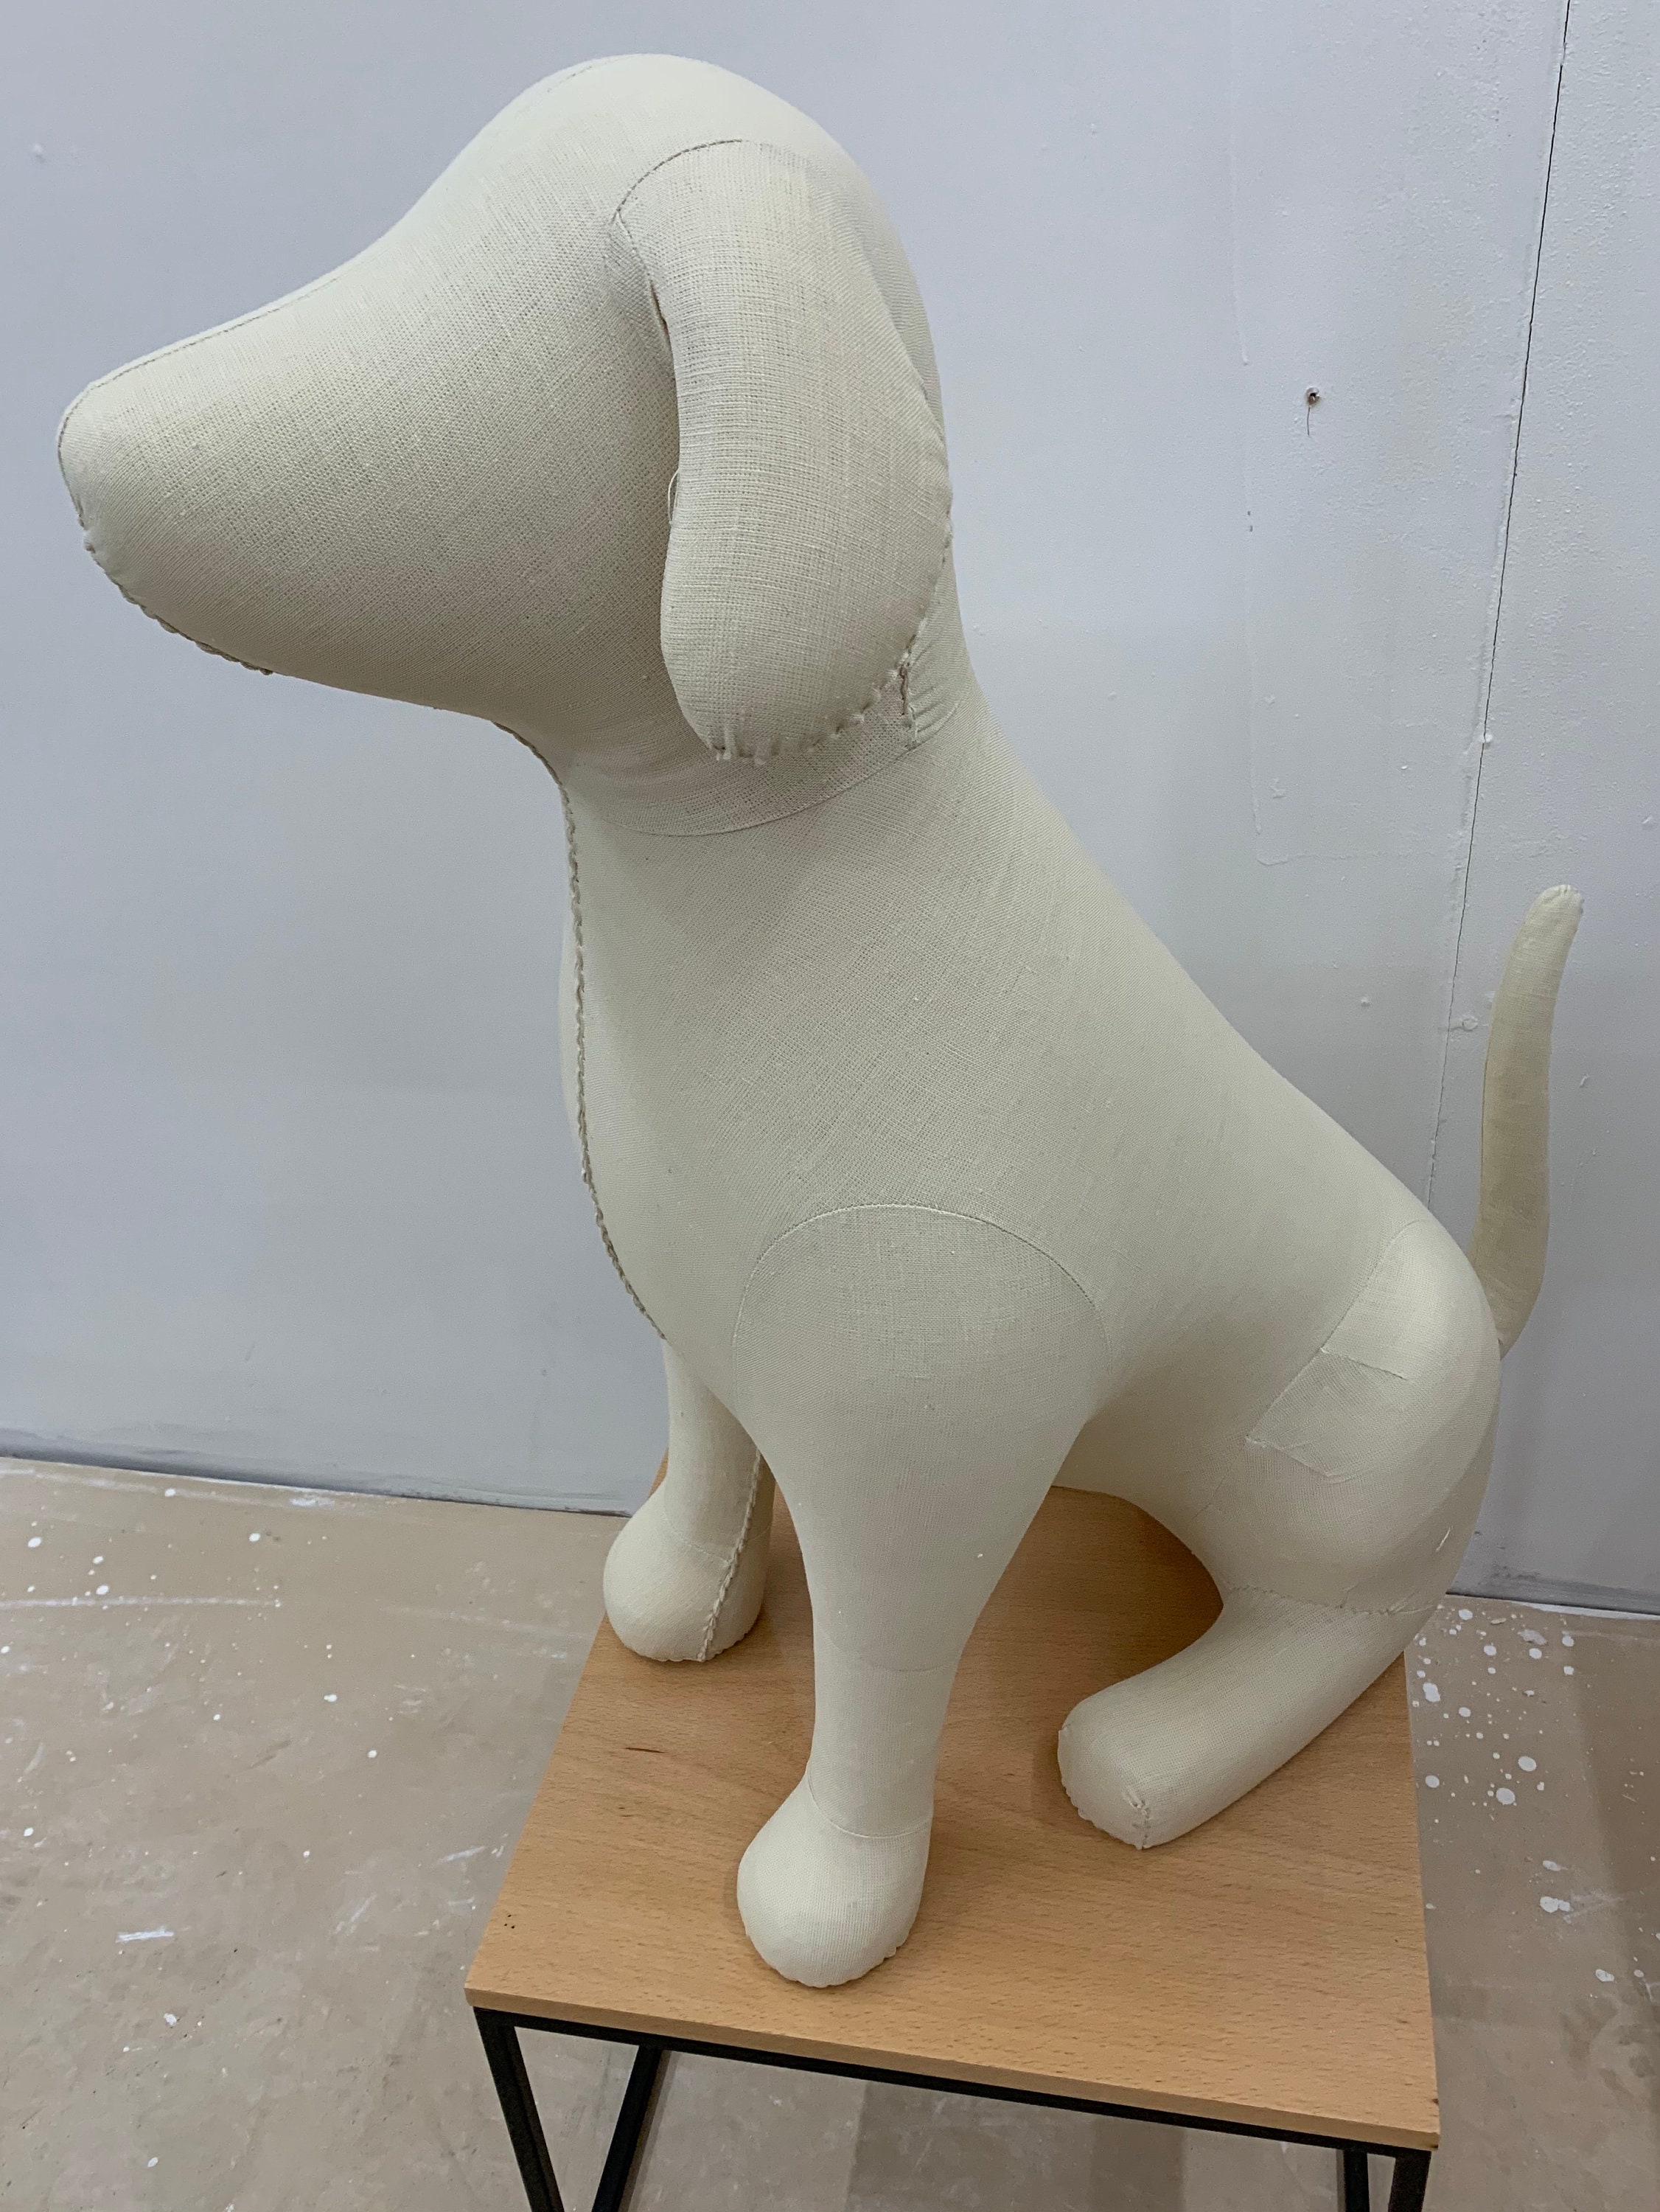 Professional Quality Dog Display Mannequin Large Sitting Dog, Fabric  Covered, Perfect for Display or Draping 